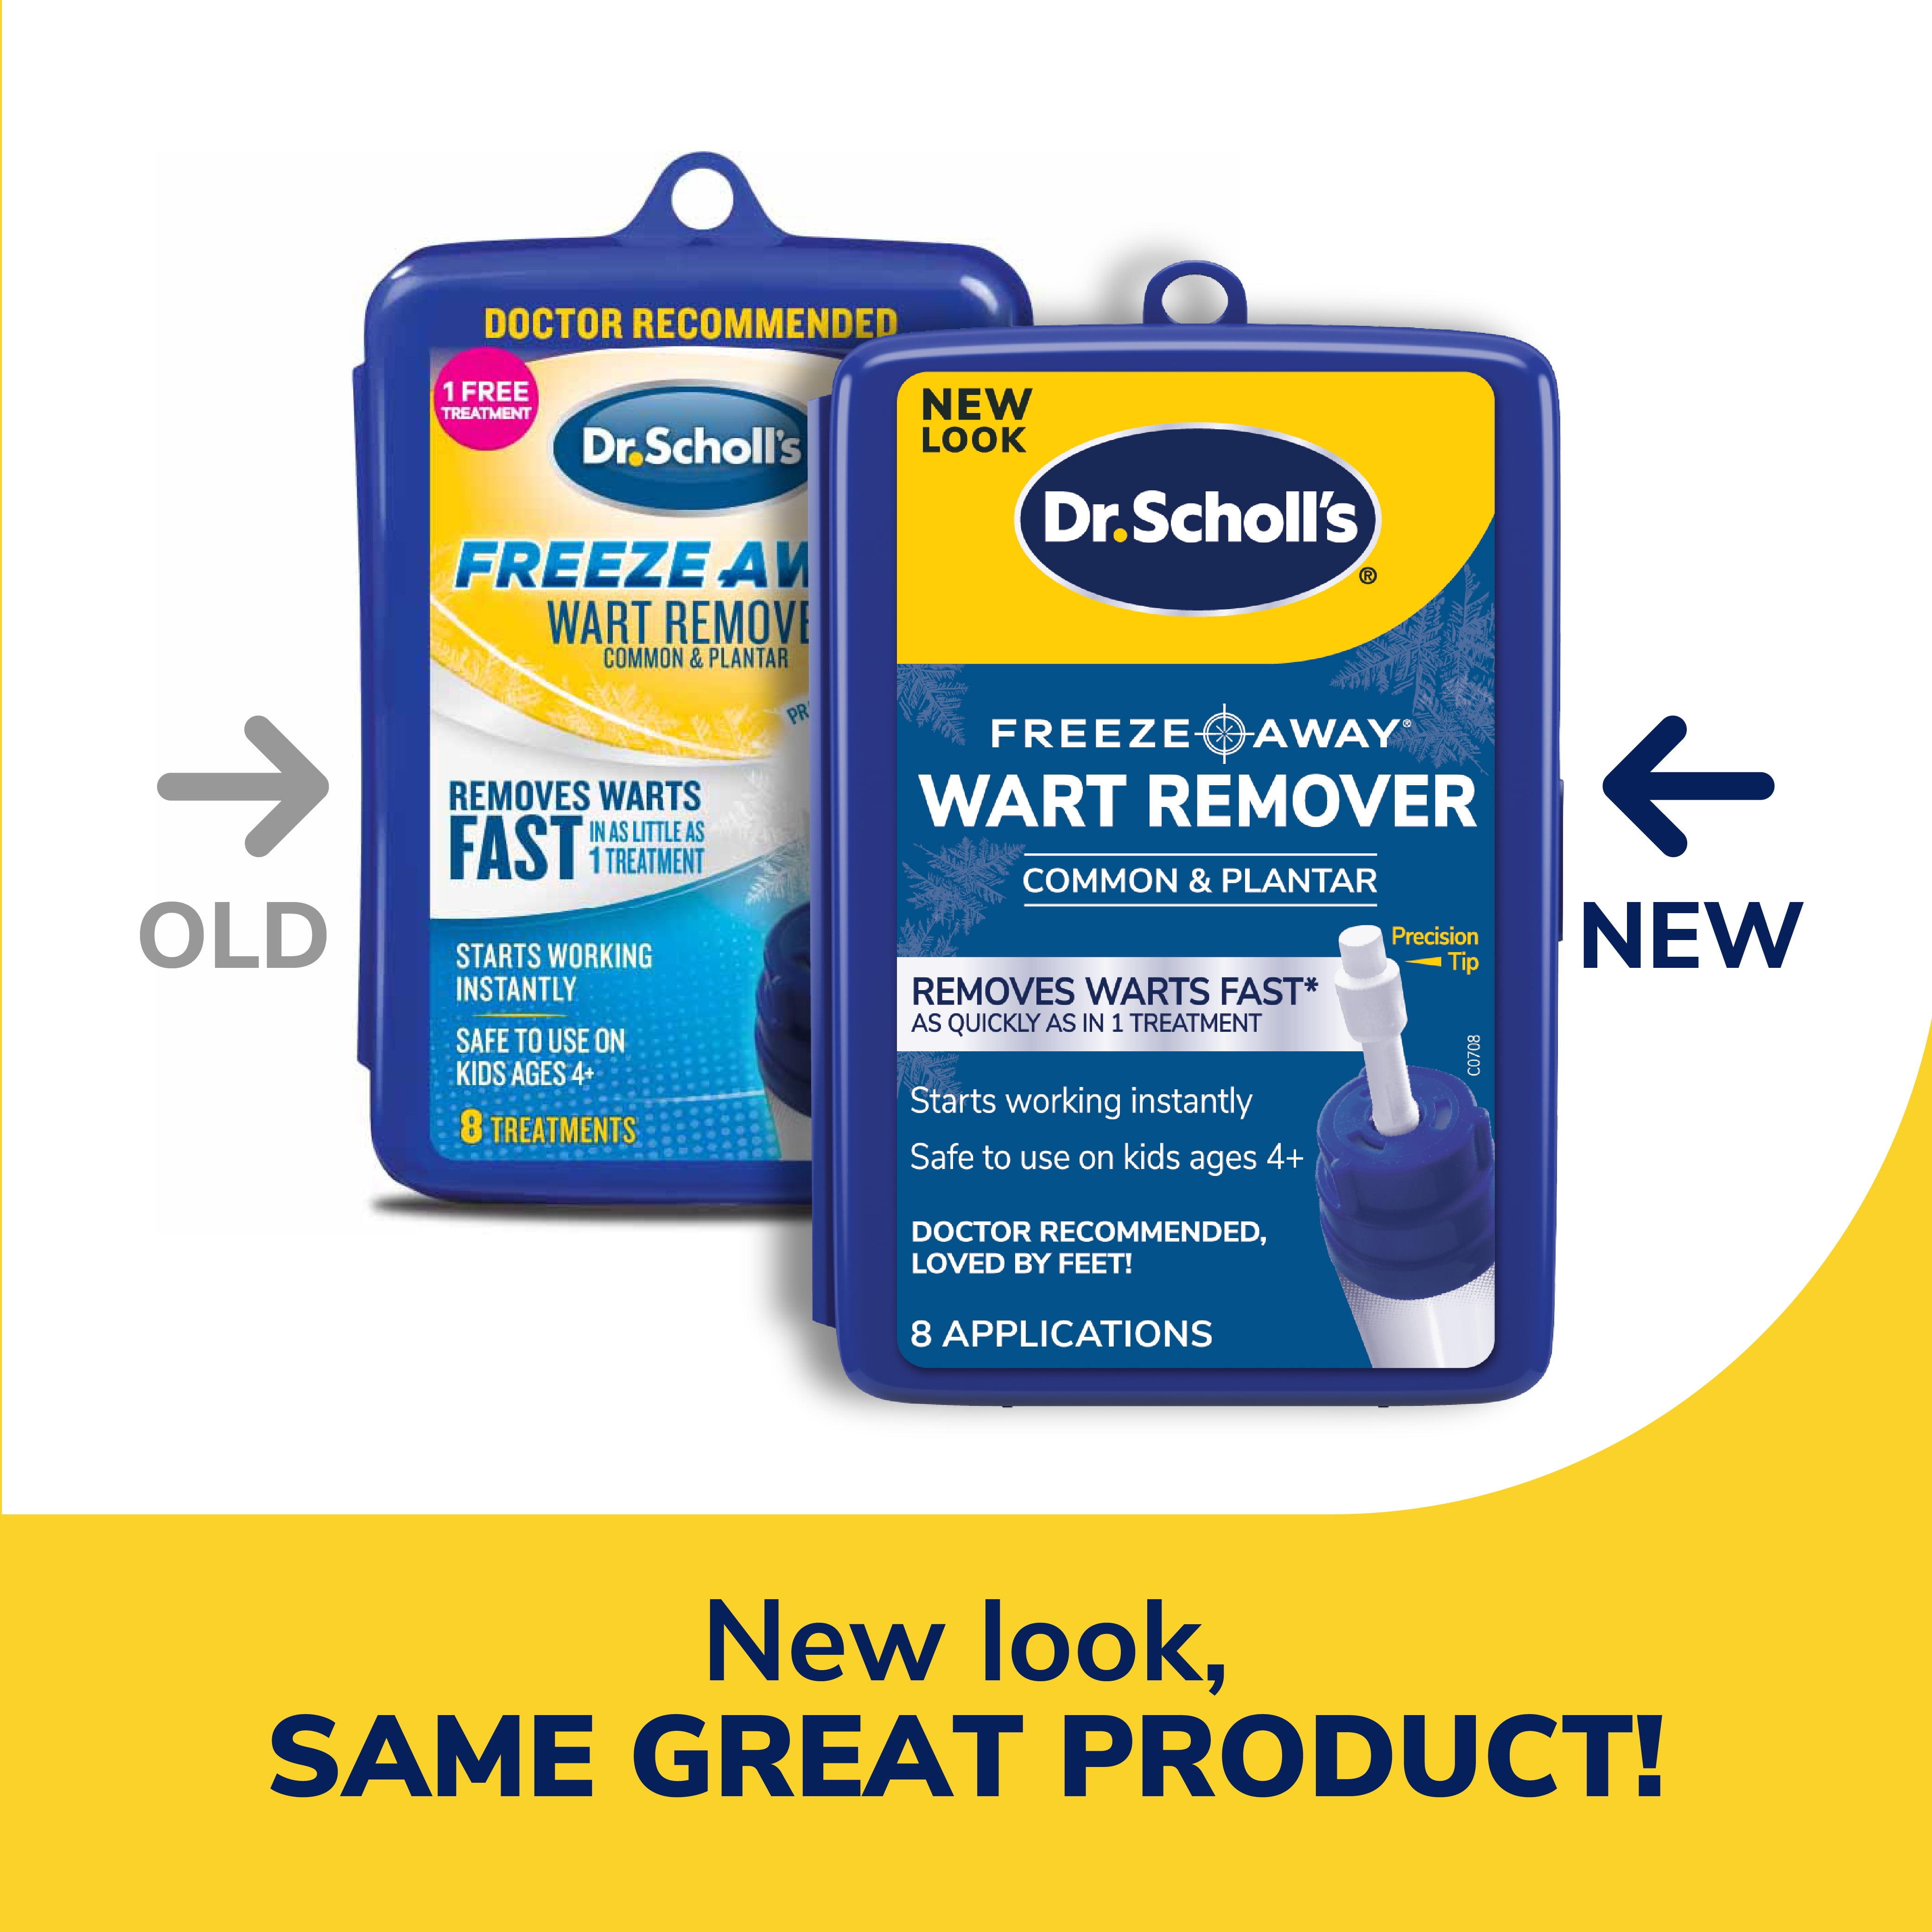 Dr. Scholl's puts feet first with latest launches